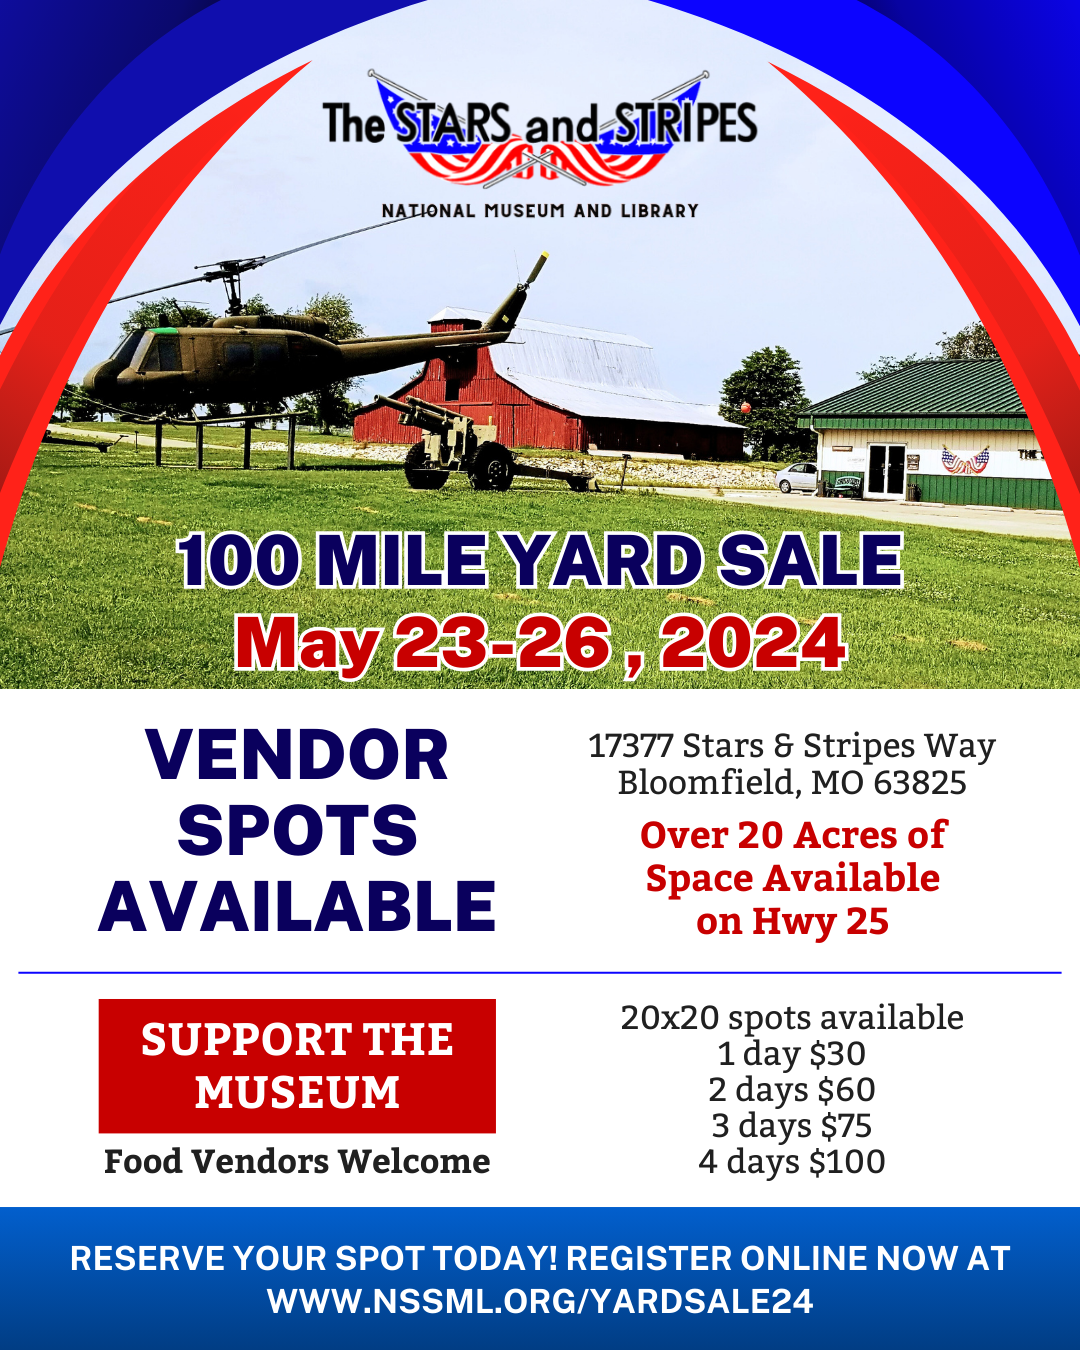 The Stars and Stripes Museum and Library will be offering vendor spots for the 100 Mile Yard Sale which will be held Memorial Day Weekend on May 23 to May 26 2024